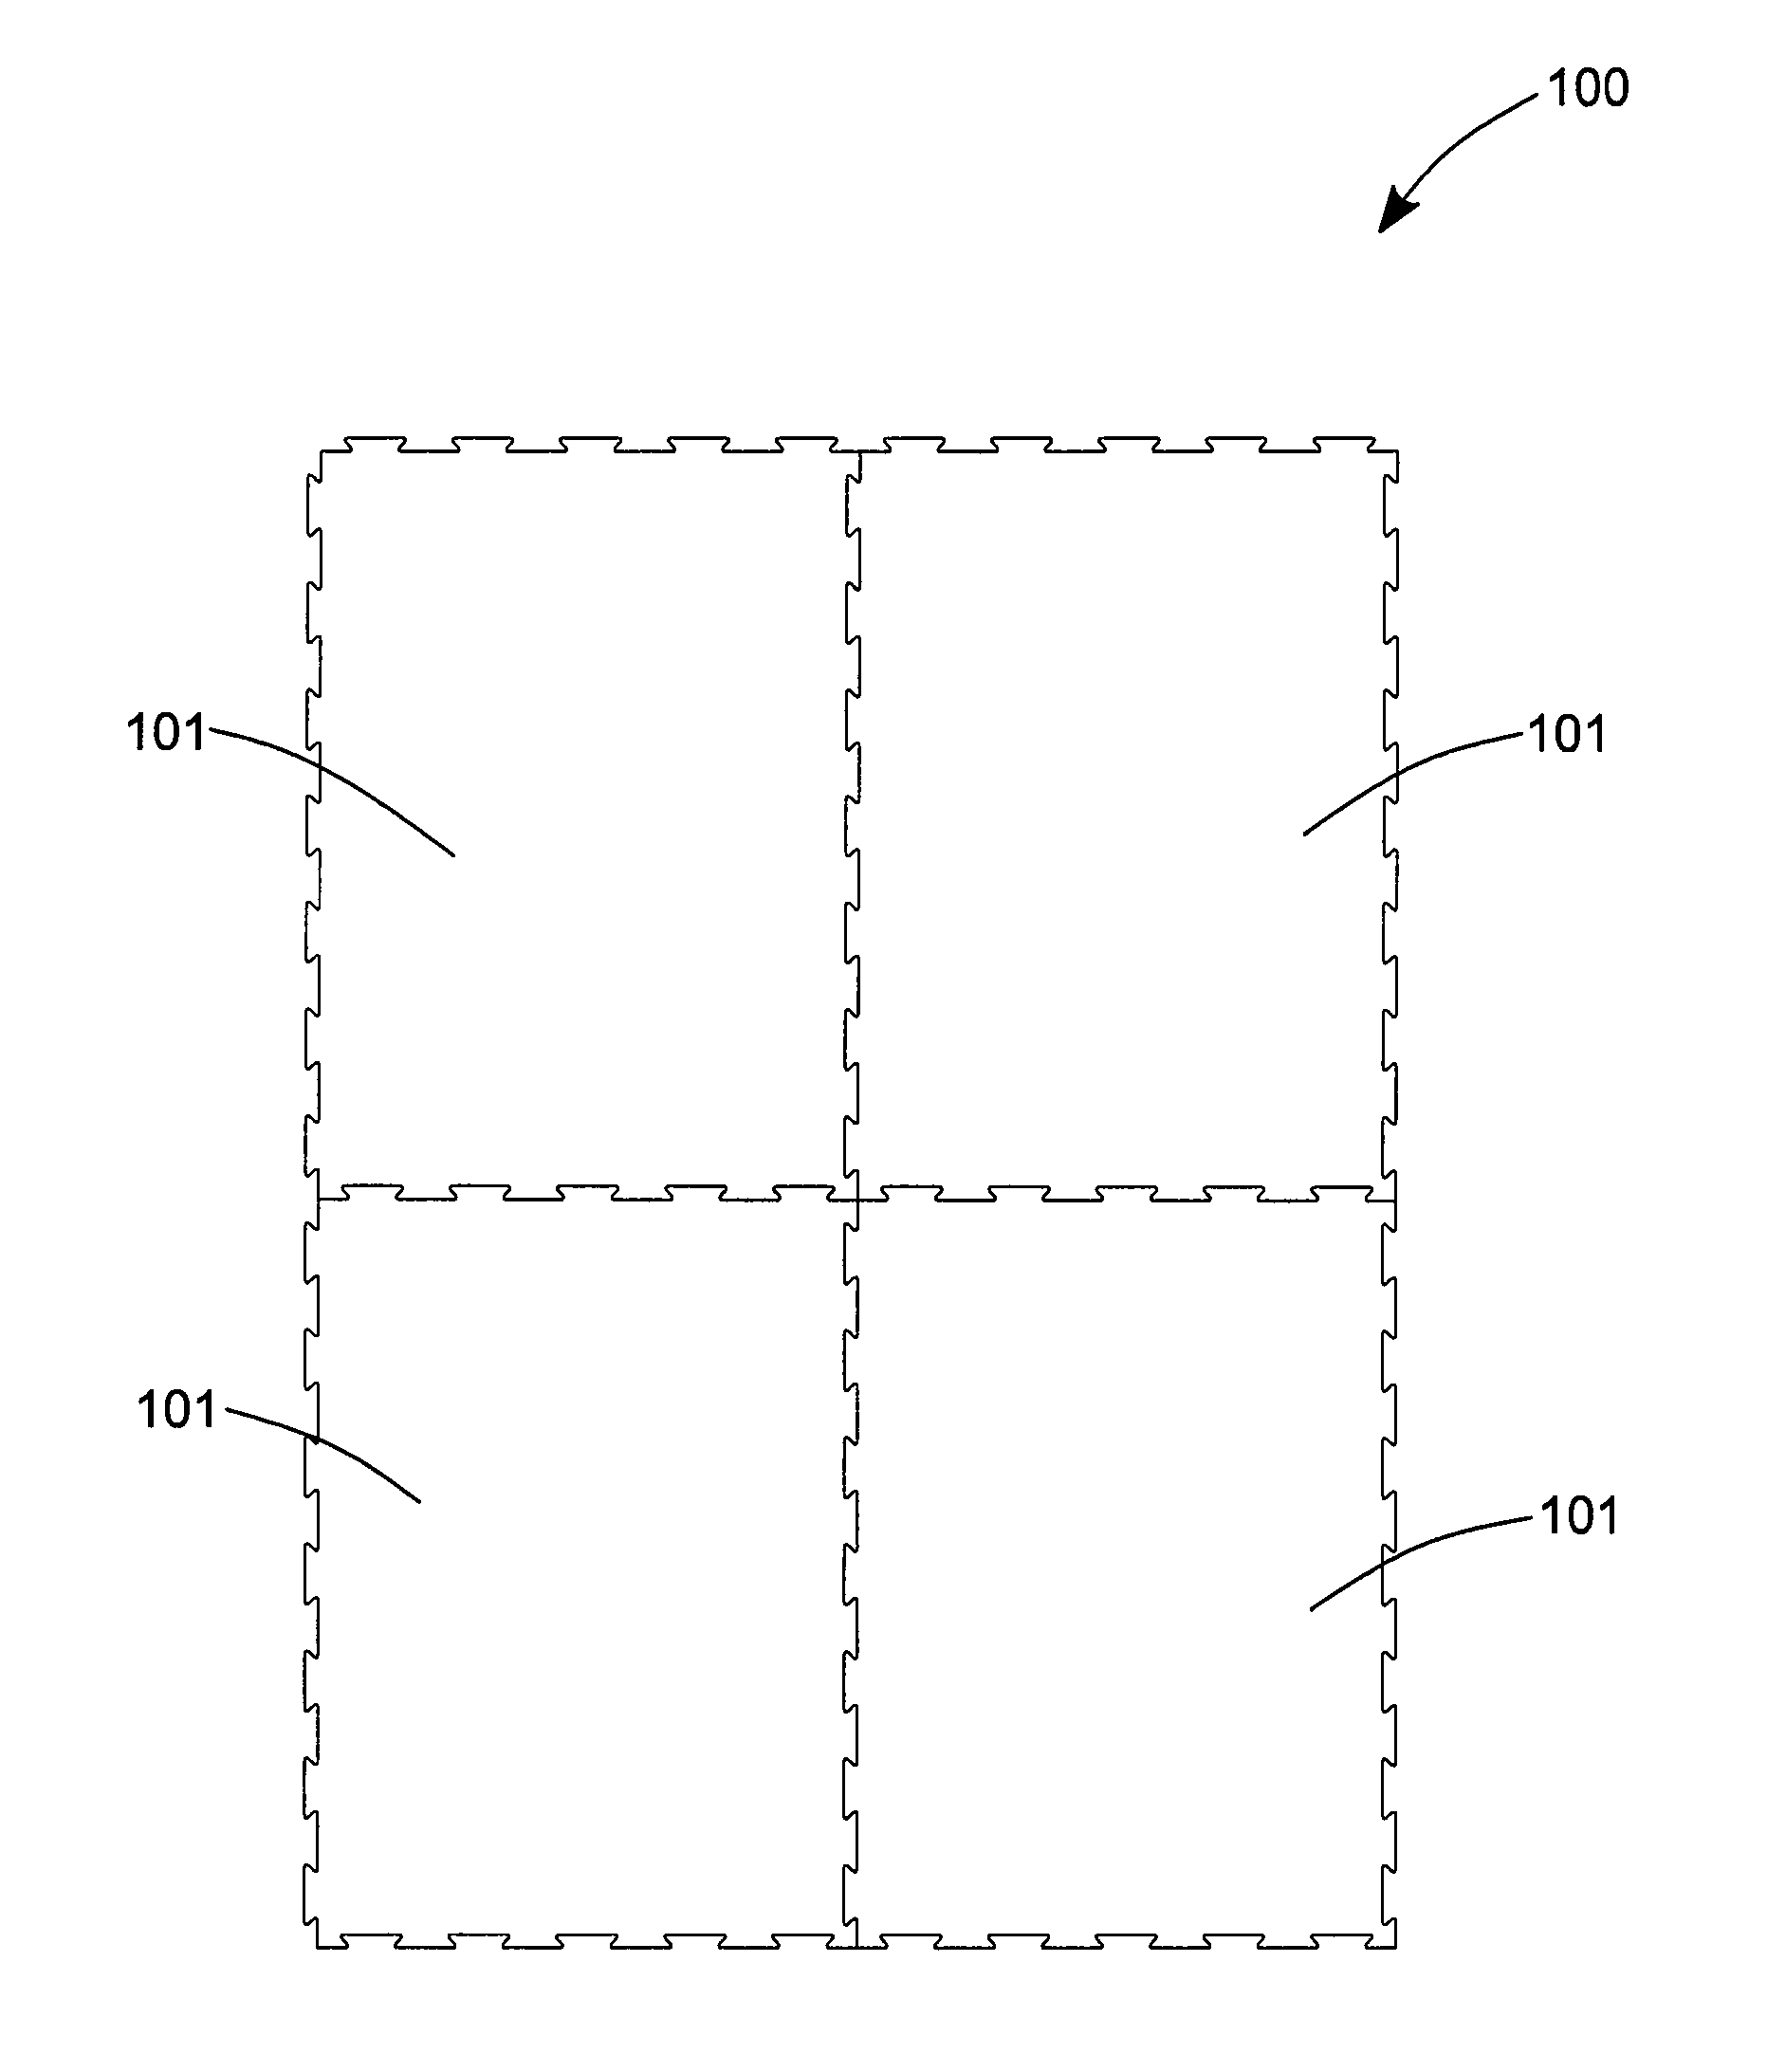 Interlocking modular flooring assembly with bevelled connectors